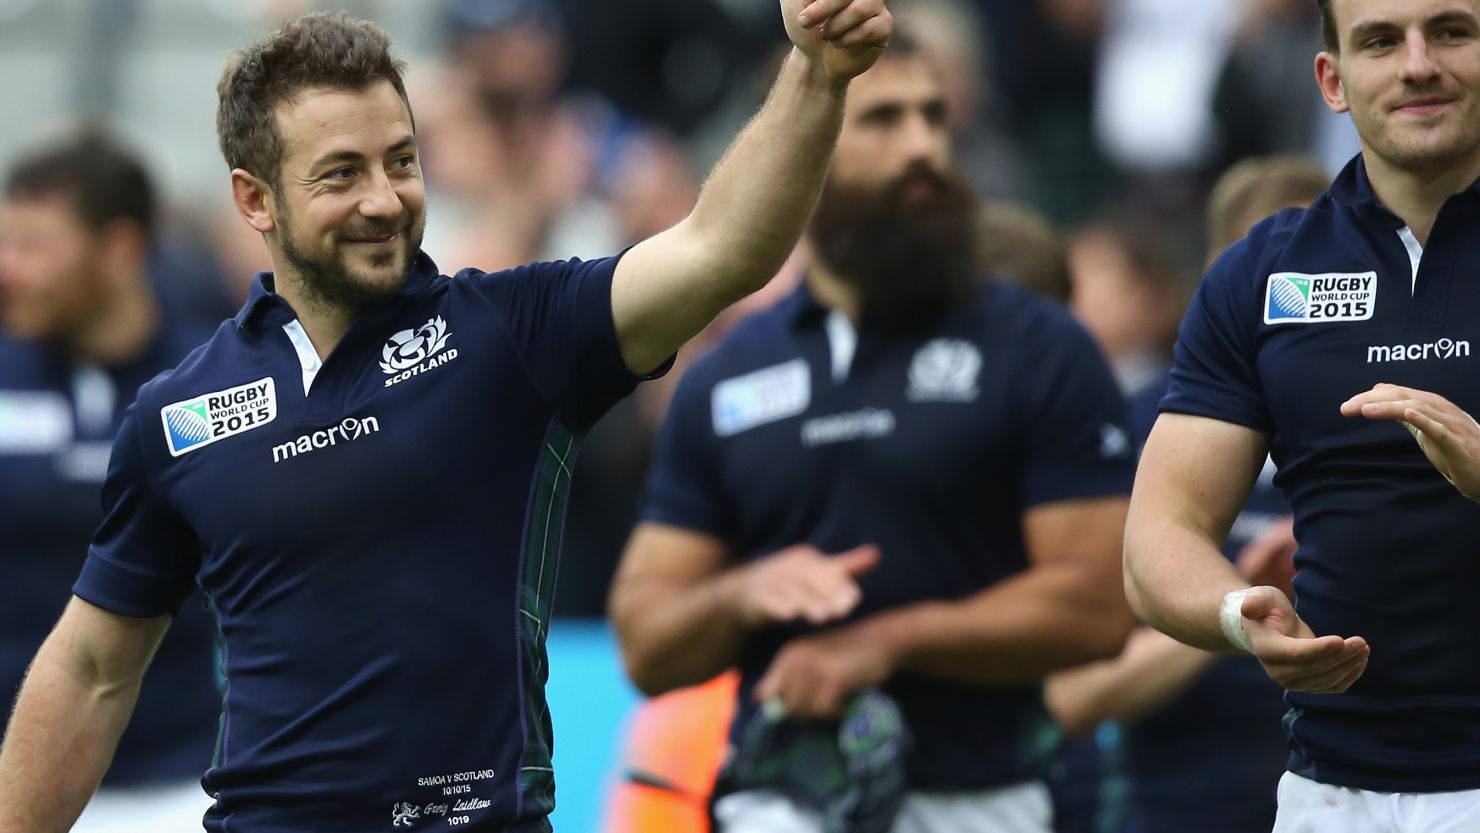 A thumbs up for captain Greig Laidlaw after his match winning performance for Scotland against Samoa to seal a RWC last eight place.